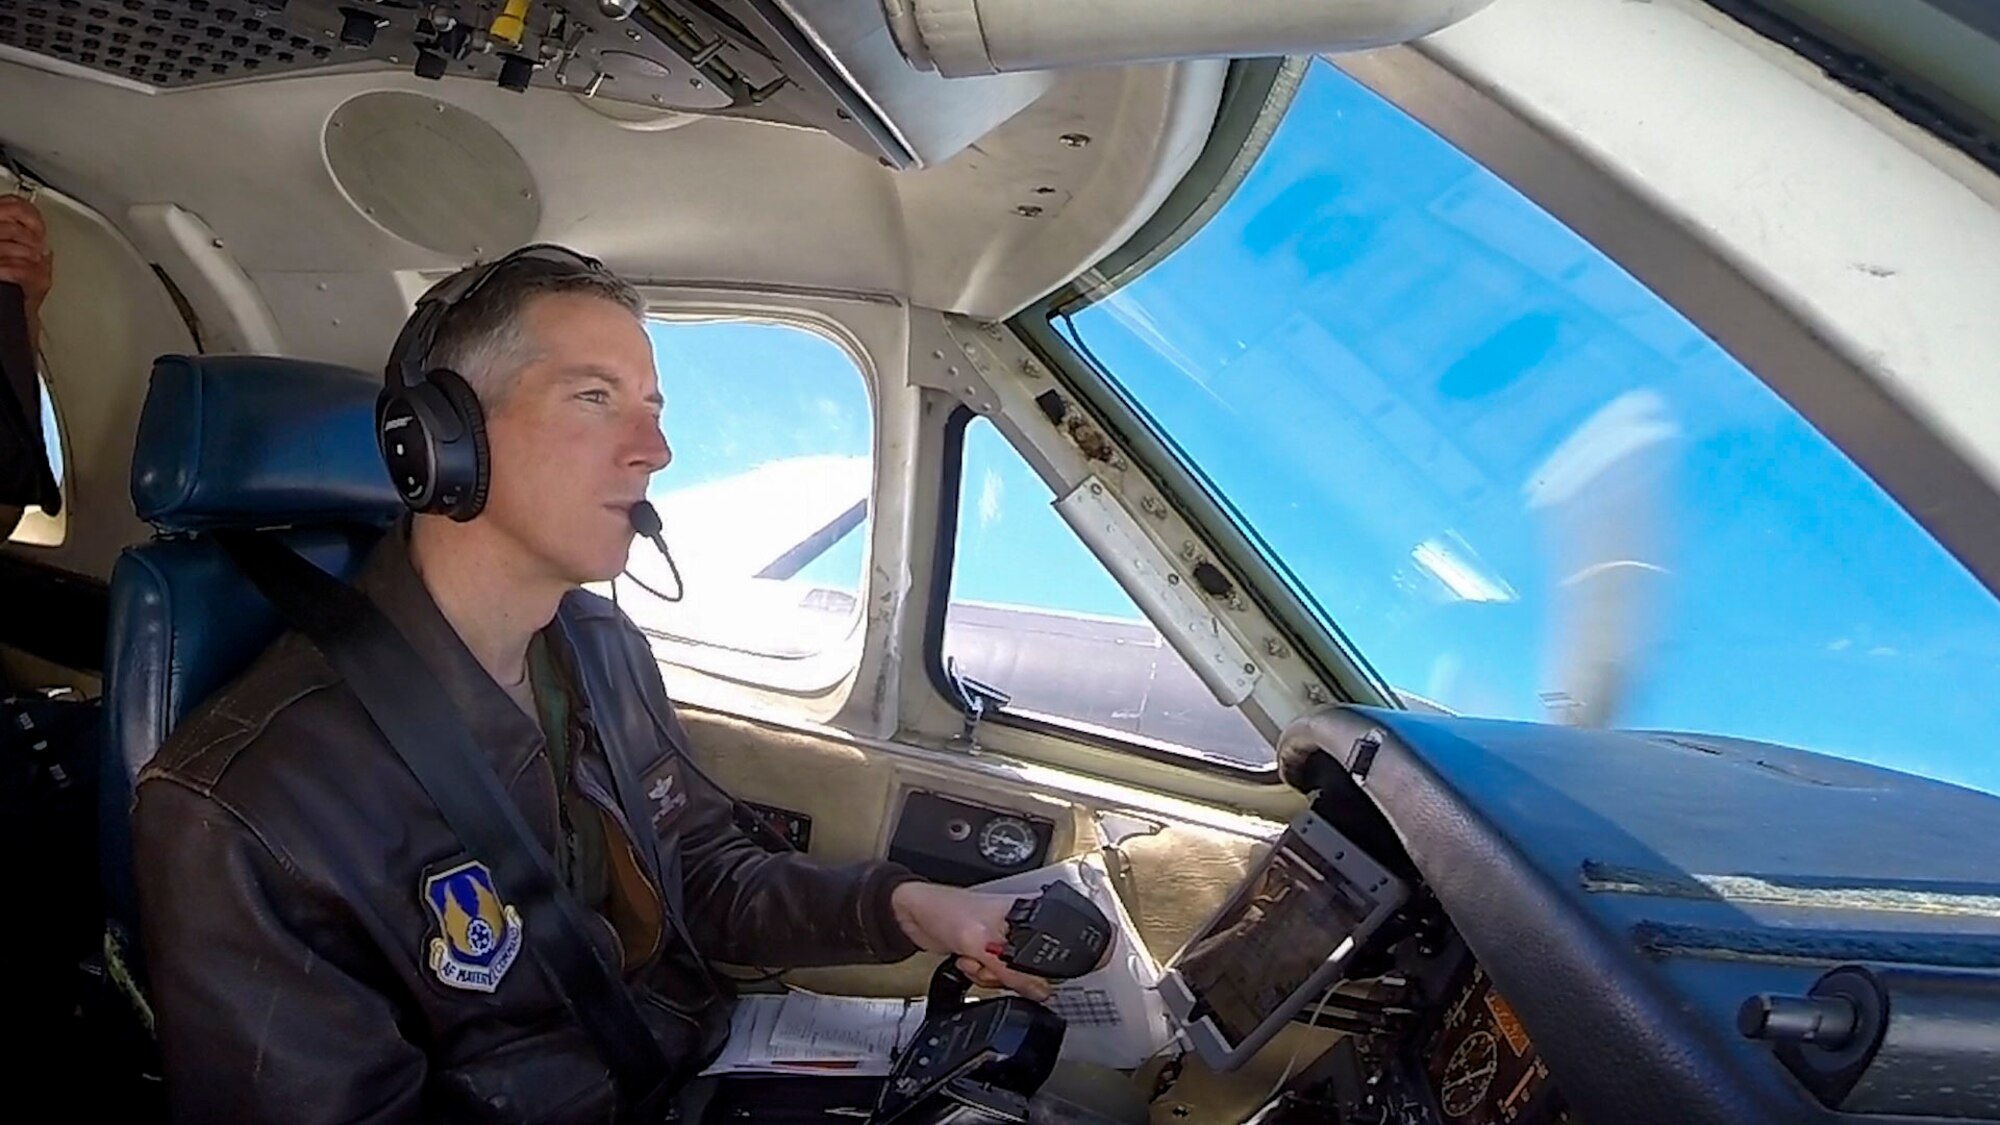 Col. Grant Mizell, Commander, 412th Operations Group pilots the C-12 Huron during the Sidewinder low level flight survey through the Southern California wilderness.